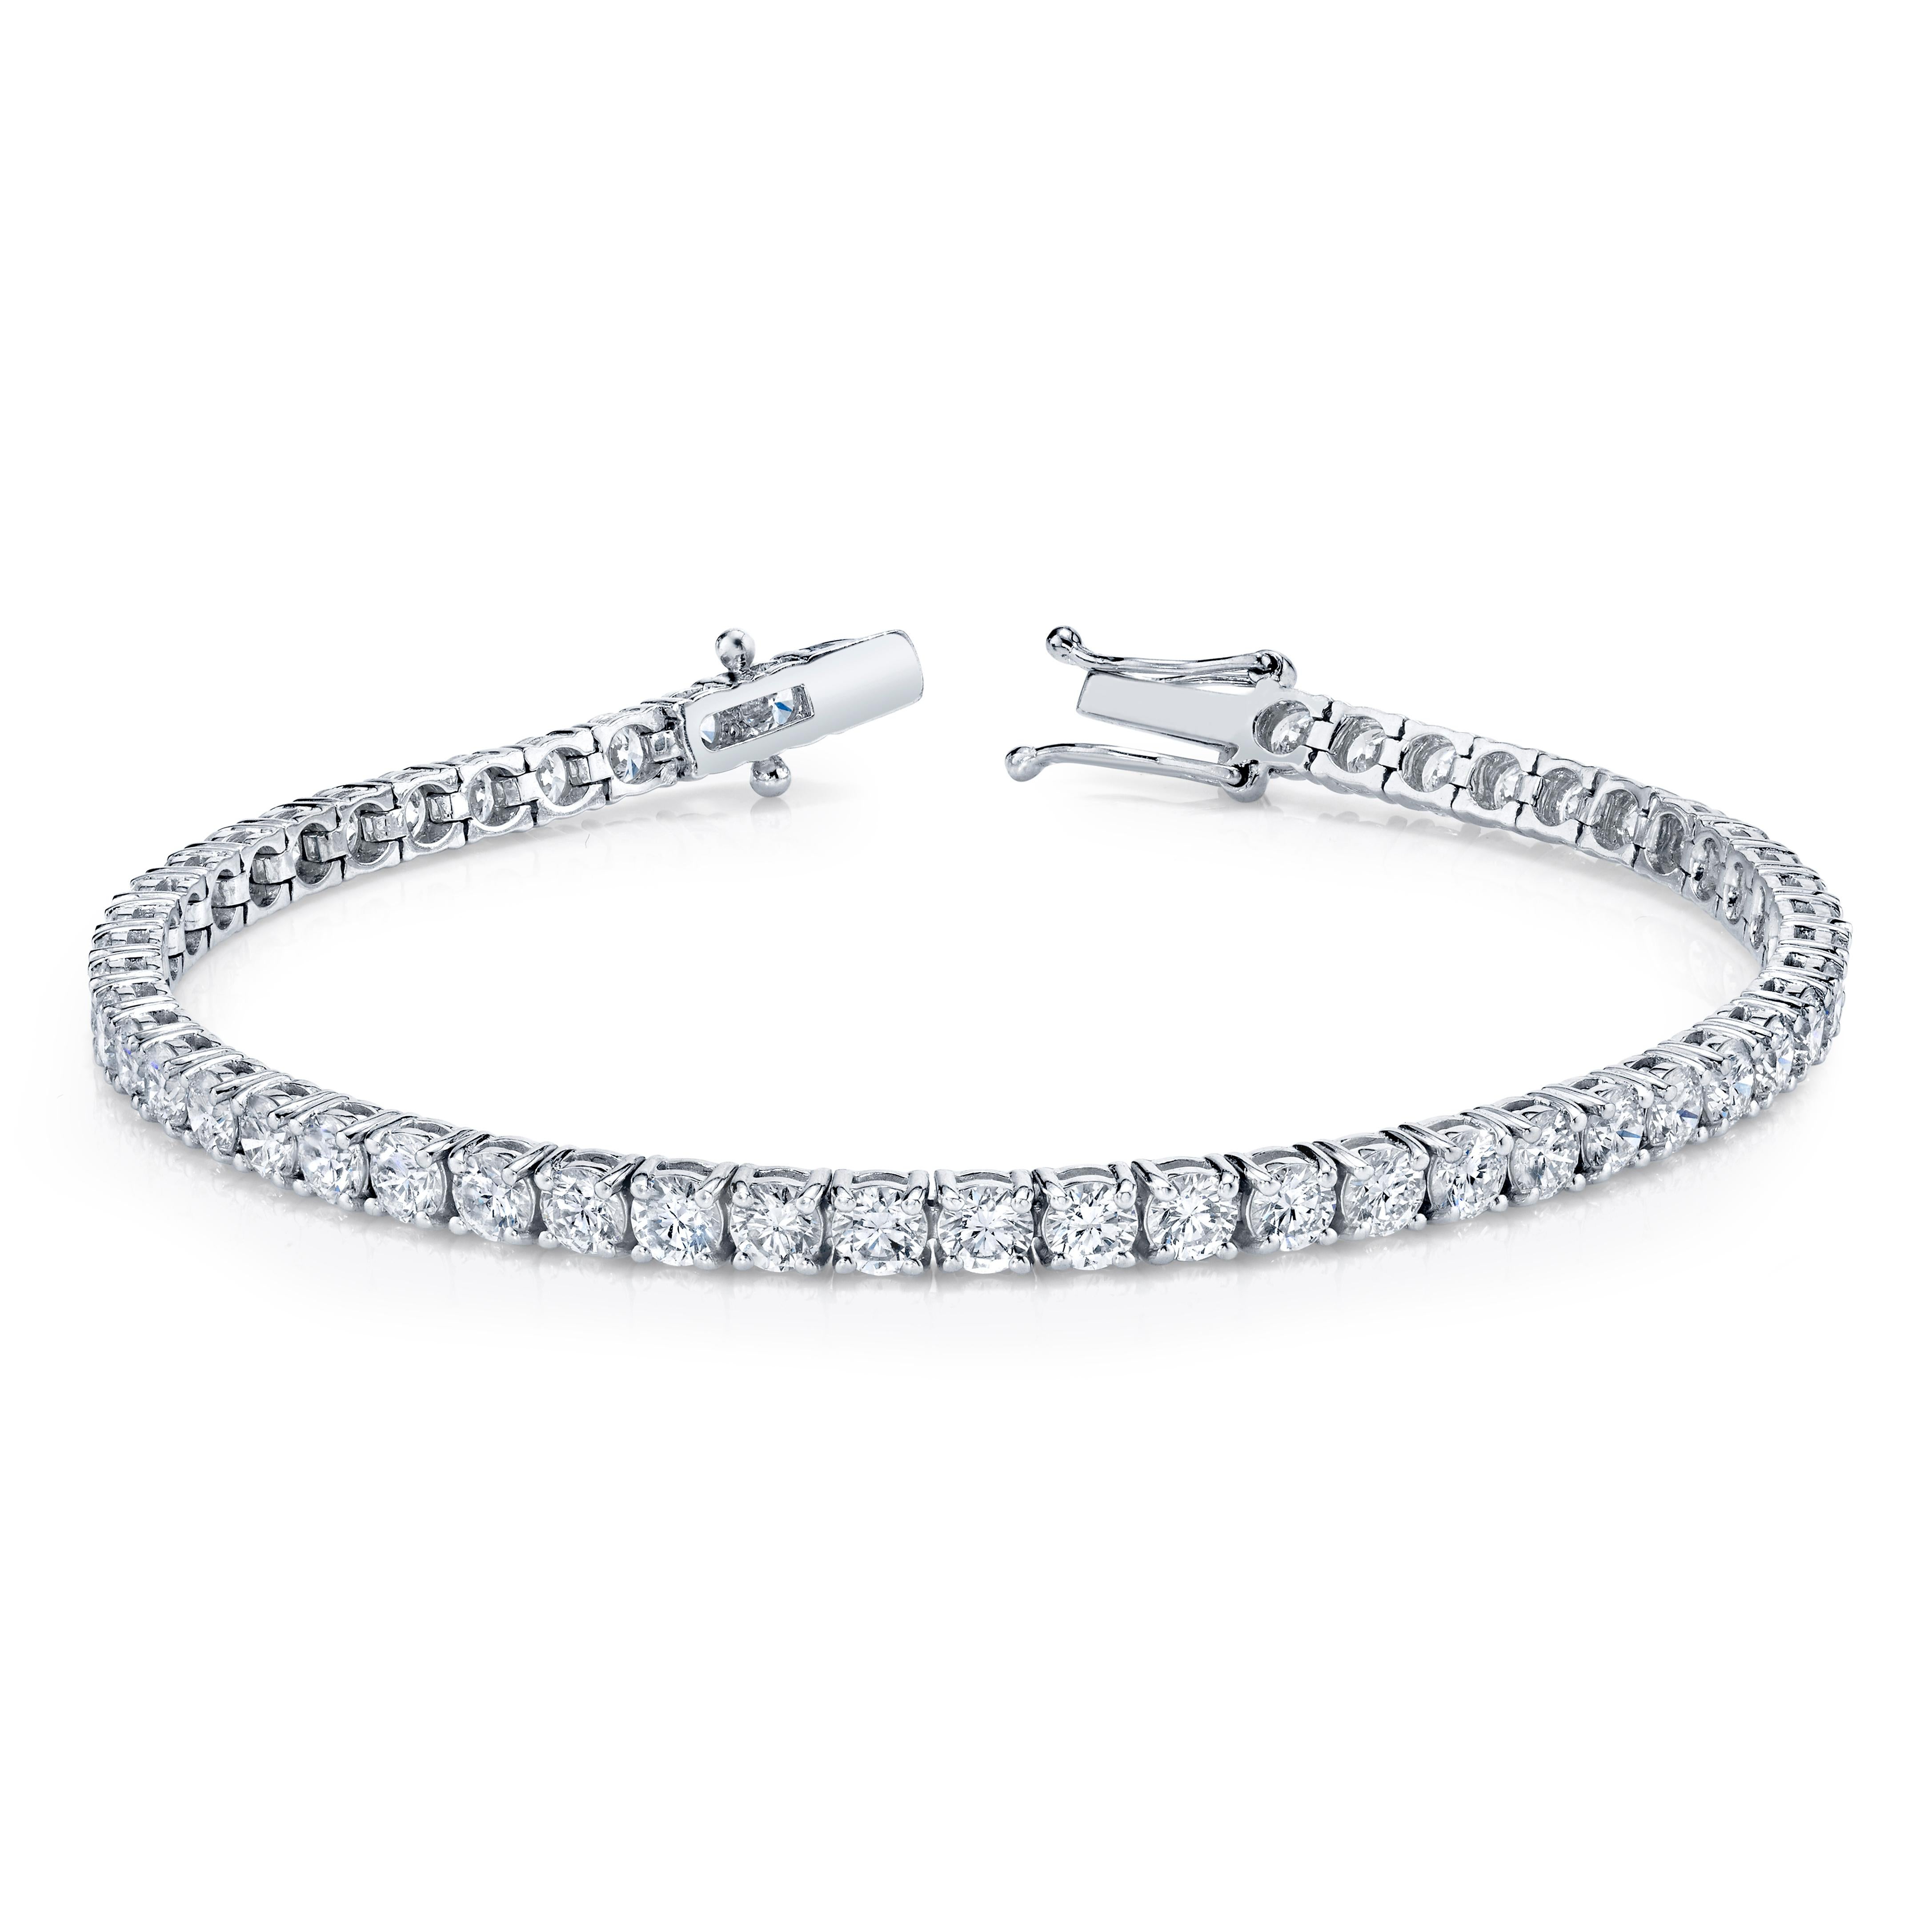 Round Brilliant Cut Diamonds set in 18k white gold 4-prong bracelet
44 stones 10.88 carat total weight
Length - 7 inches 